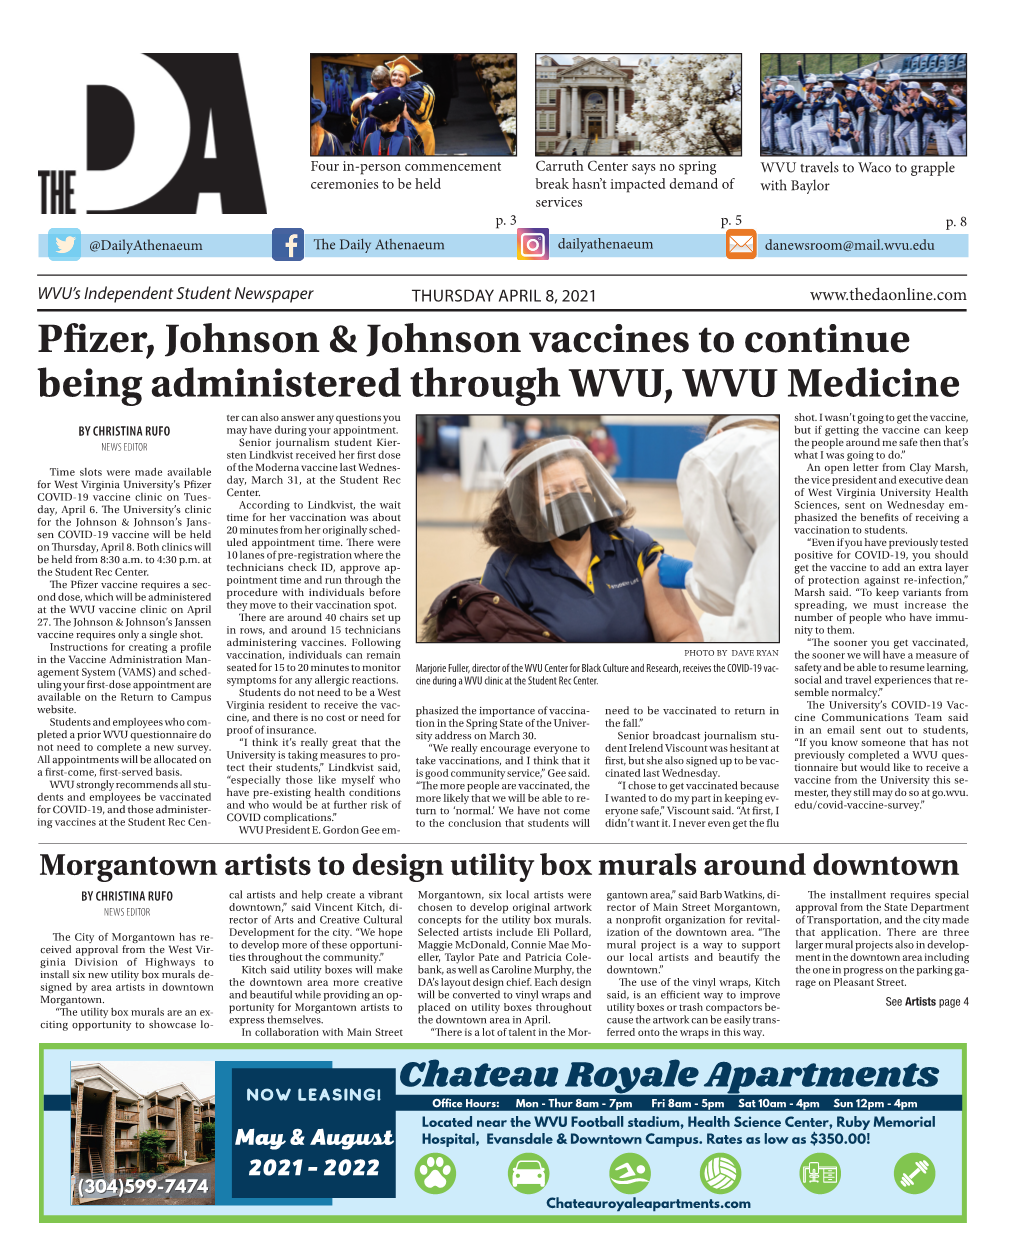 Pfizer, Johnson & Johnson Vaccines to Continue Being Administered